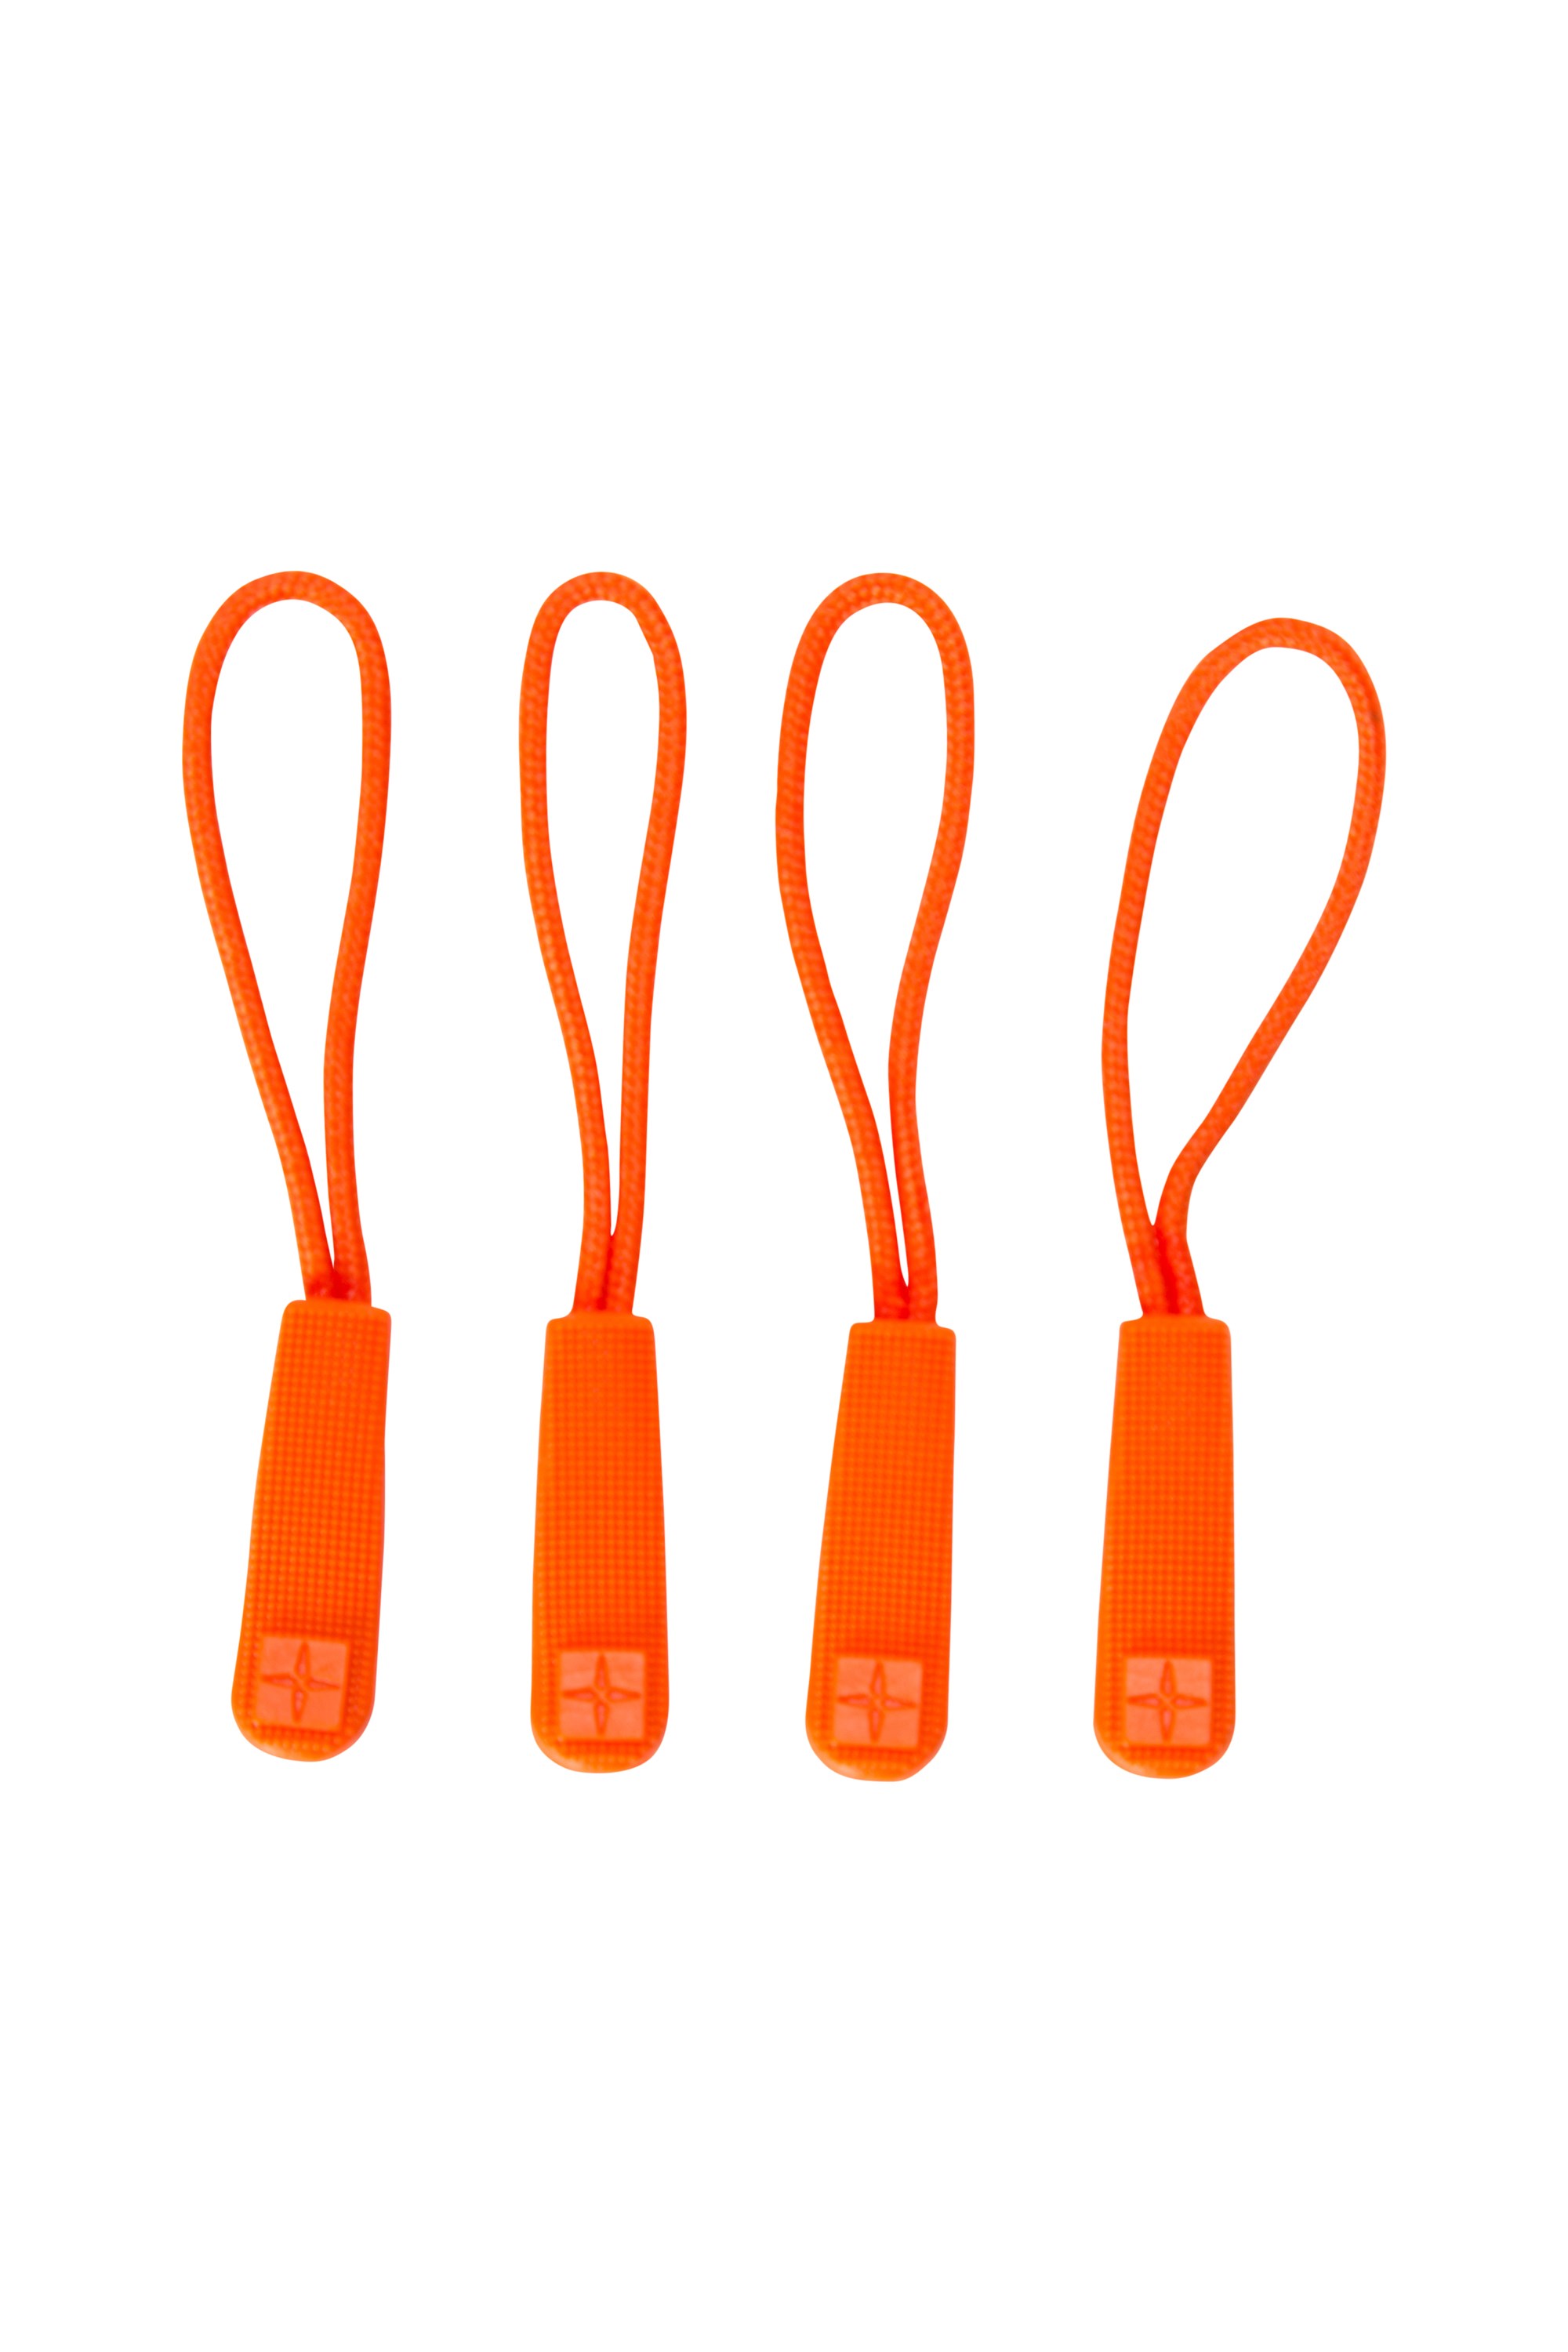 Mountain Warehouse Spare Zip Pullers 4 Pack Orange